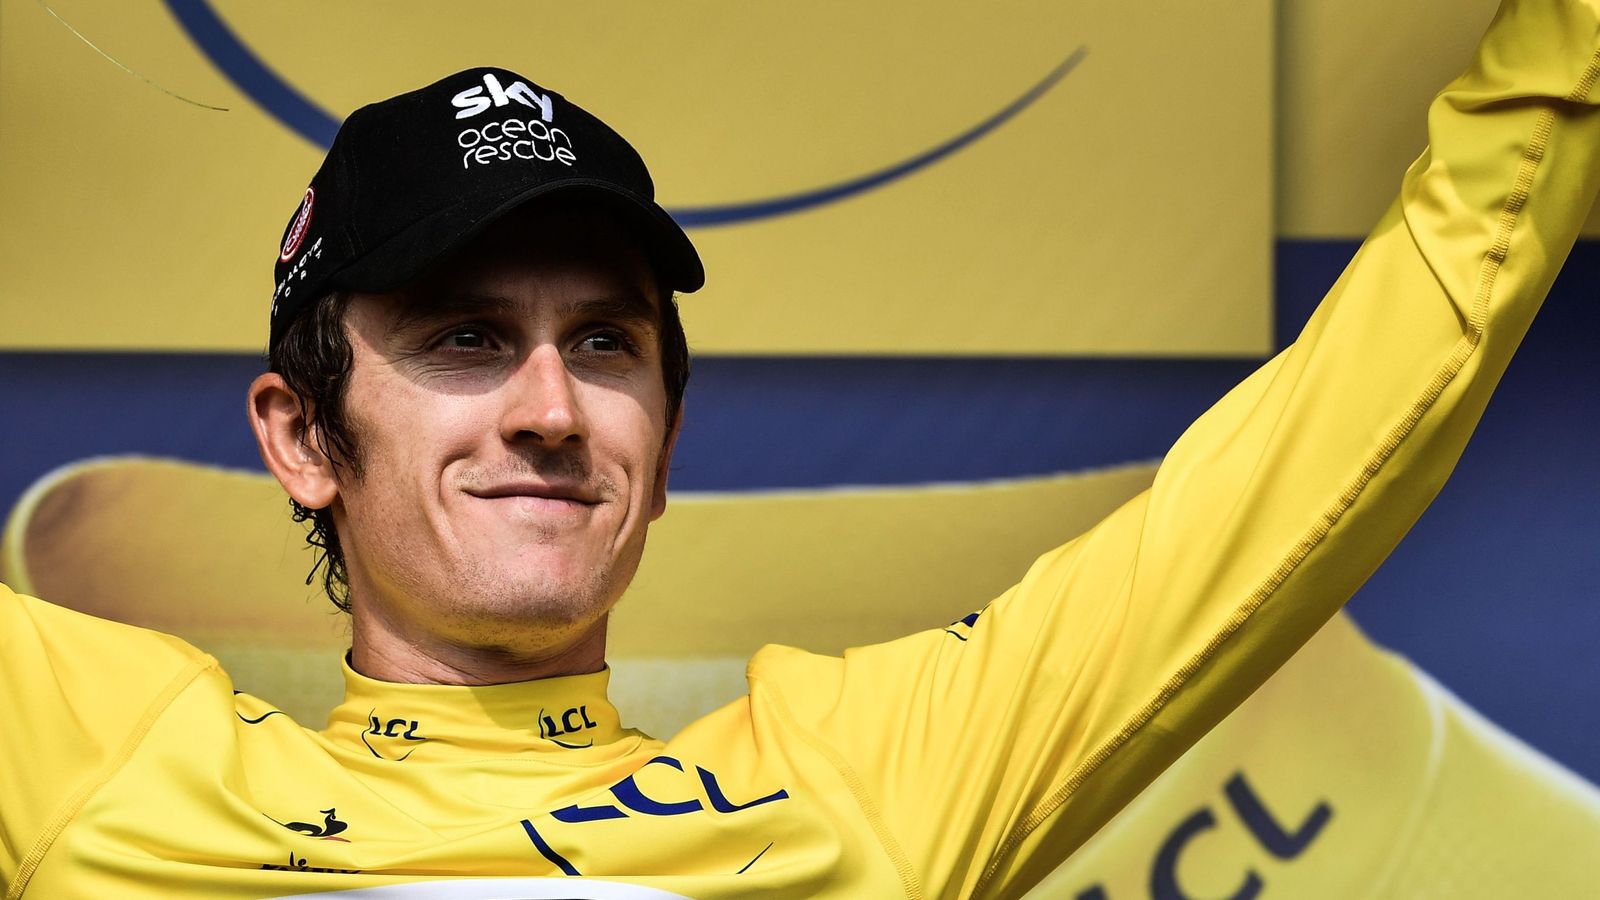 Geraint Thomas Closes In On Tour De France Glory After Second Place Finish On Stage 19 Cycling